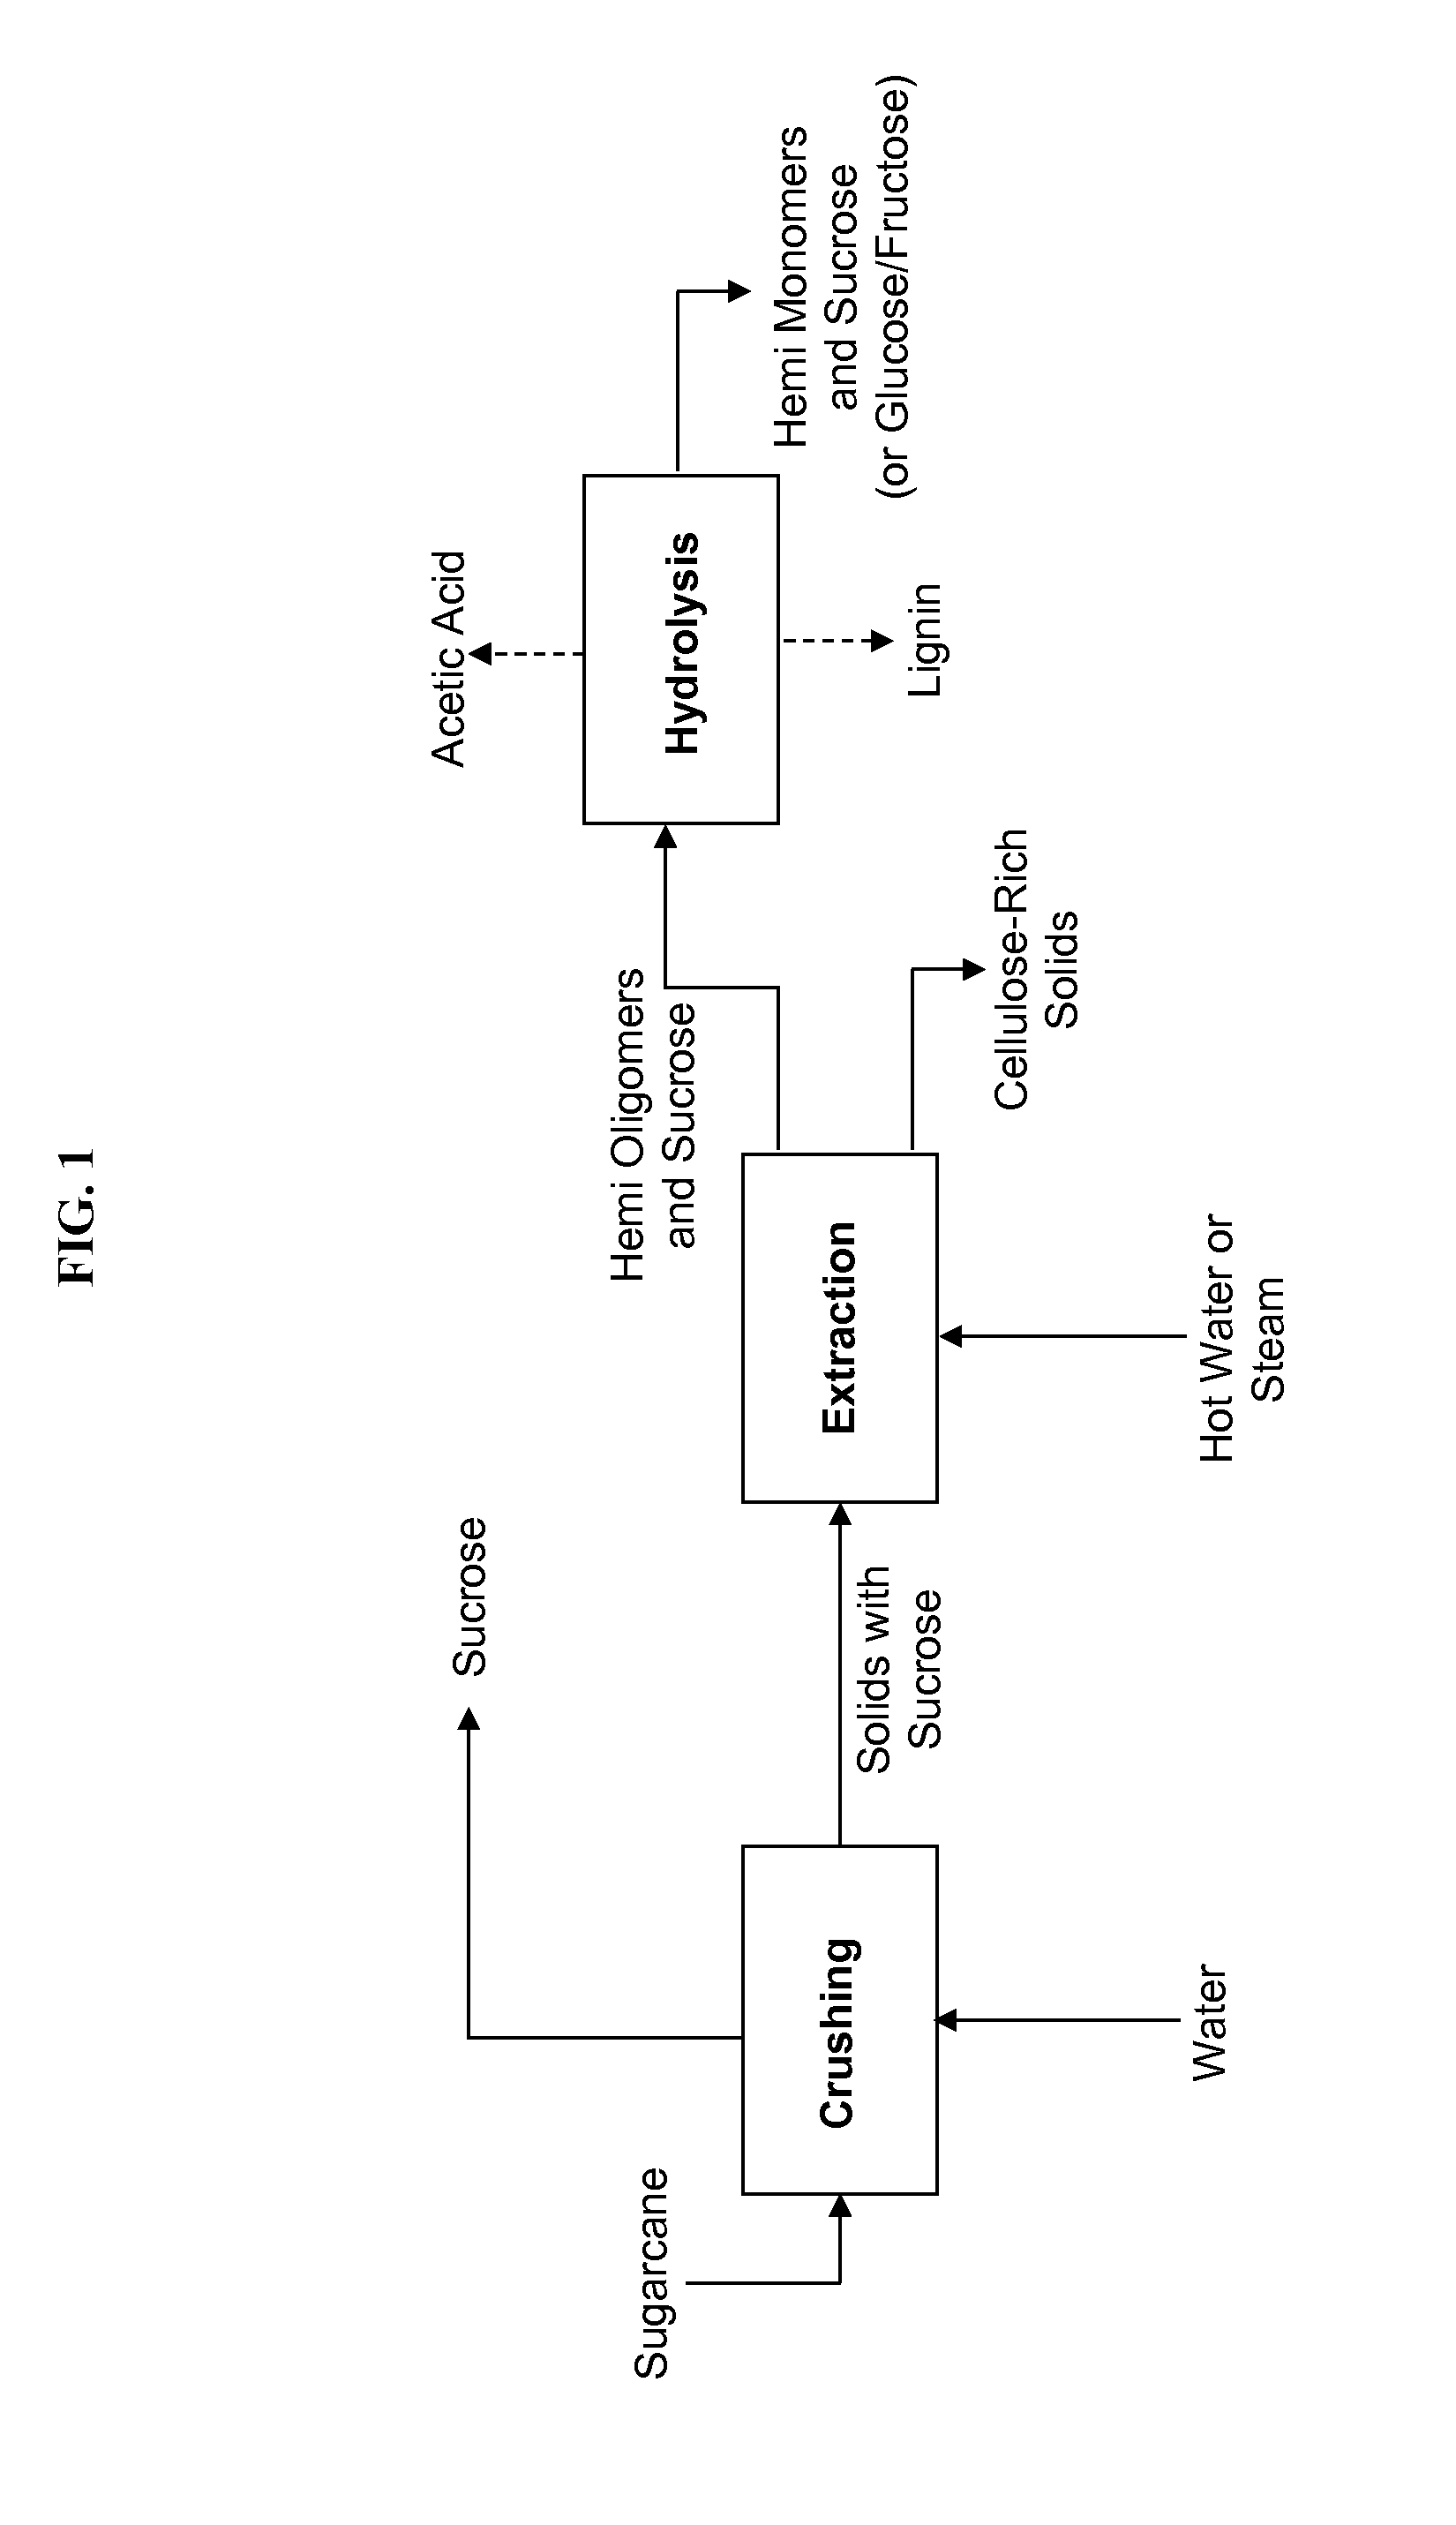 Processes and apparatus for refining sugarcane to produce sugars, biofuels, and/or biochemicals